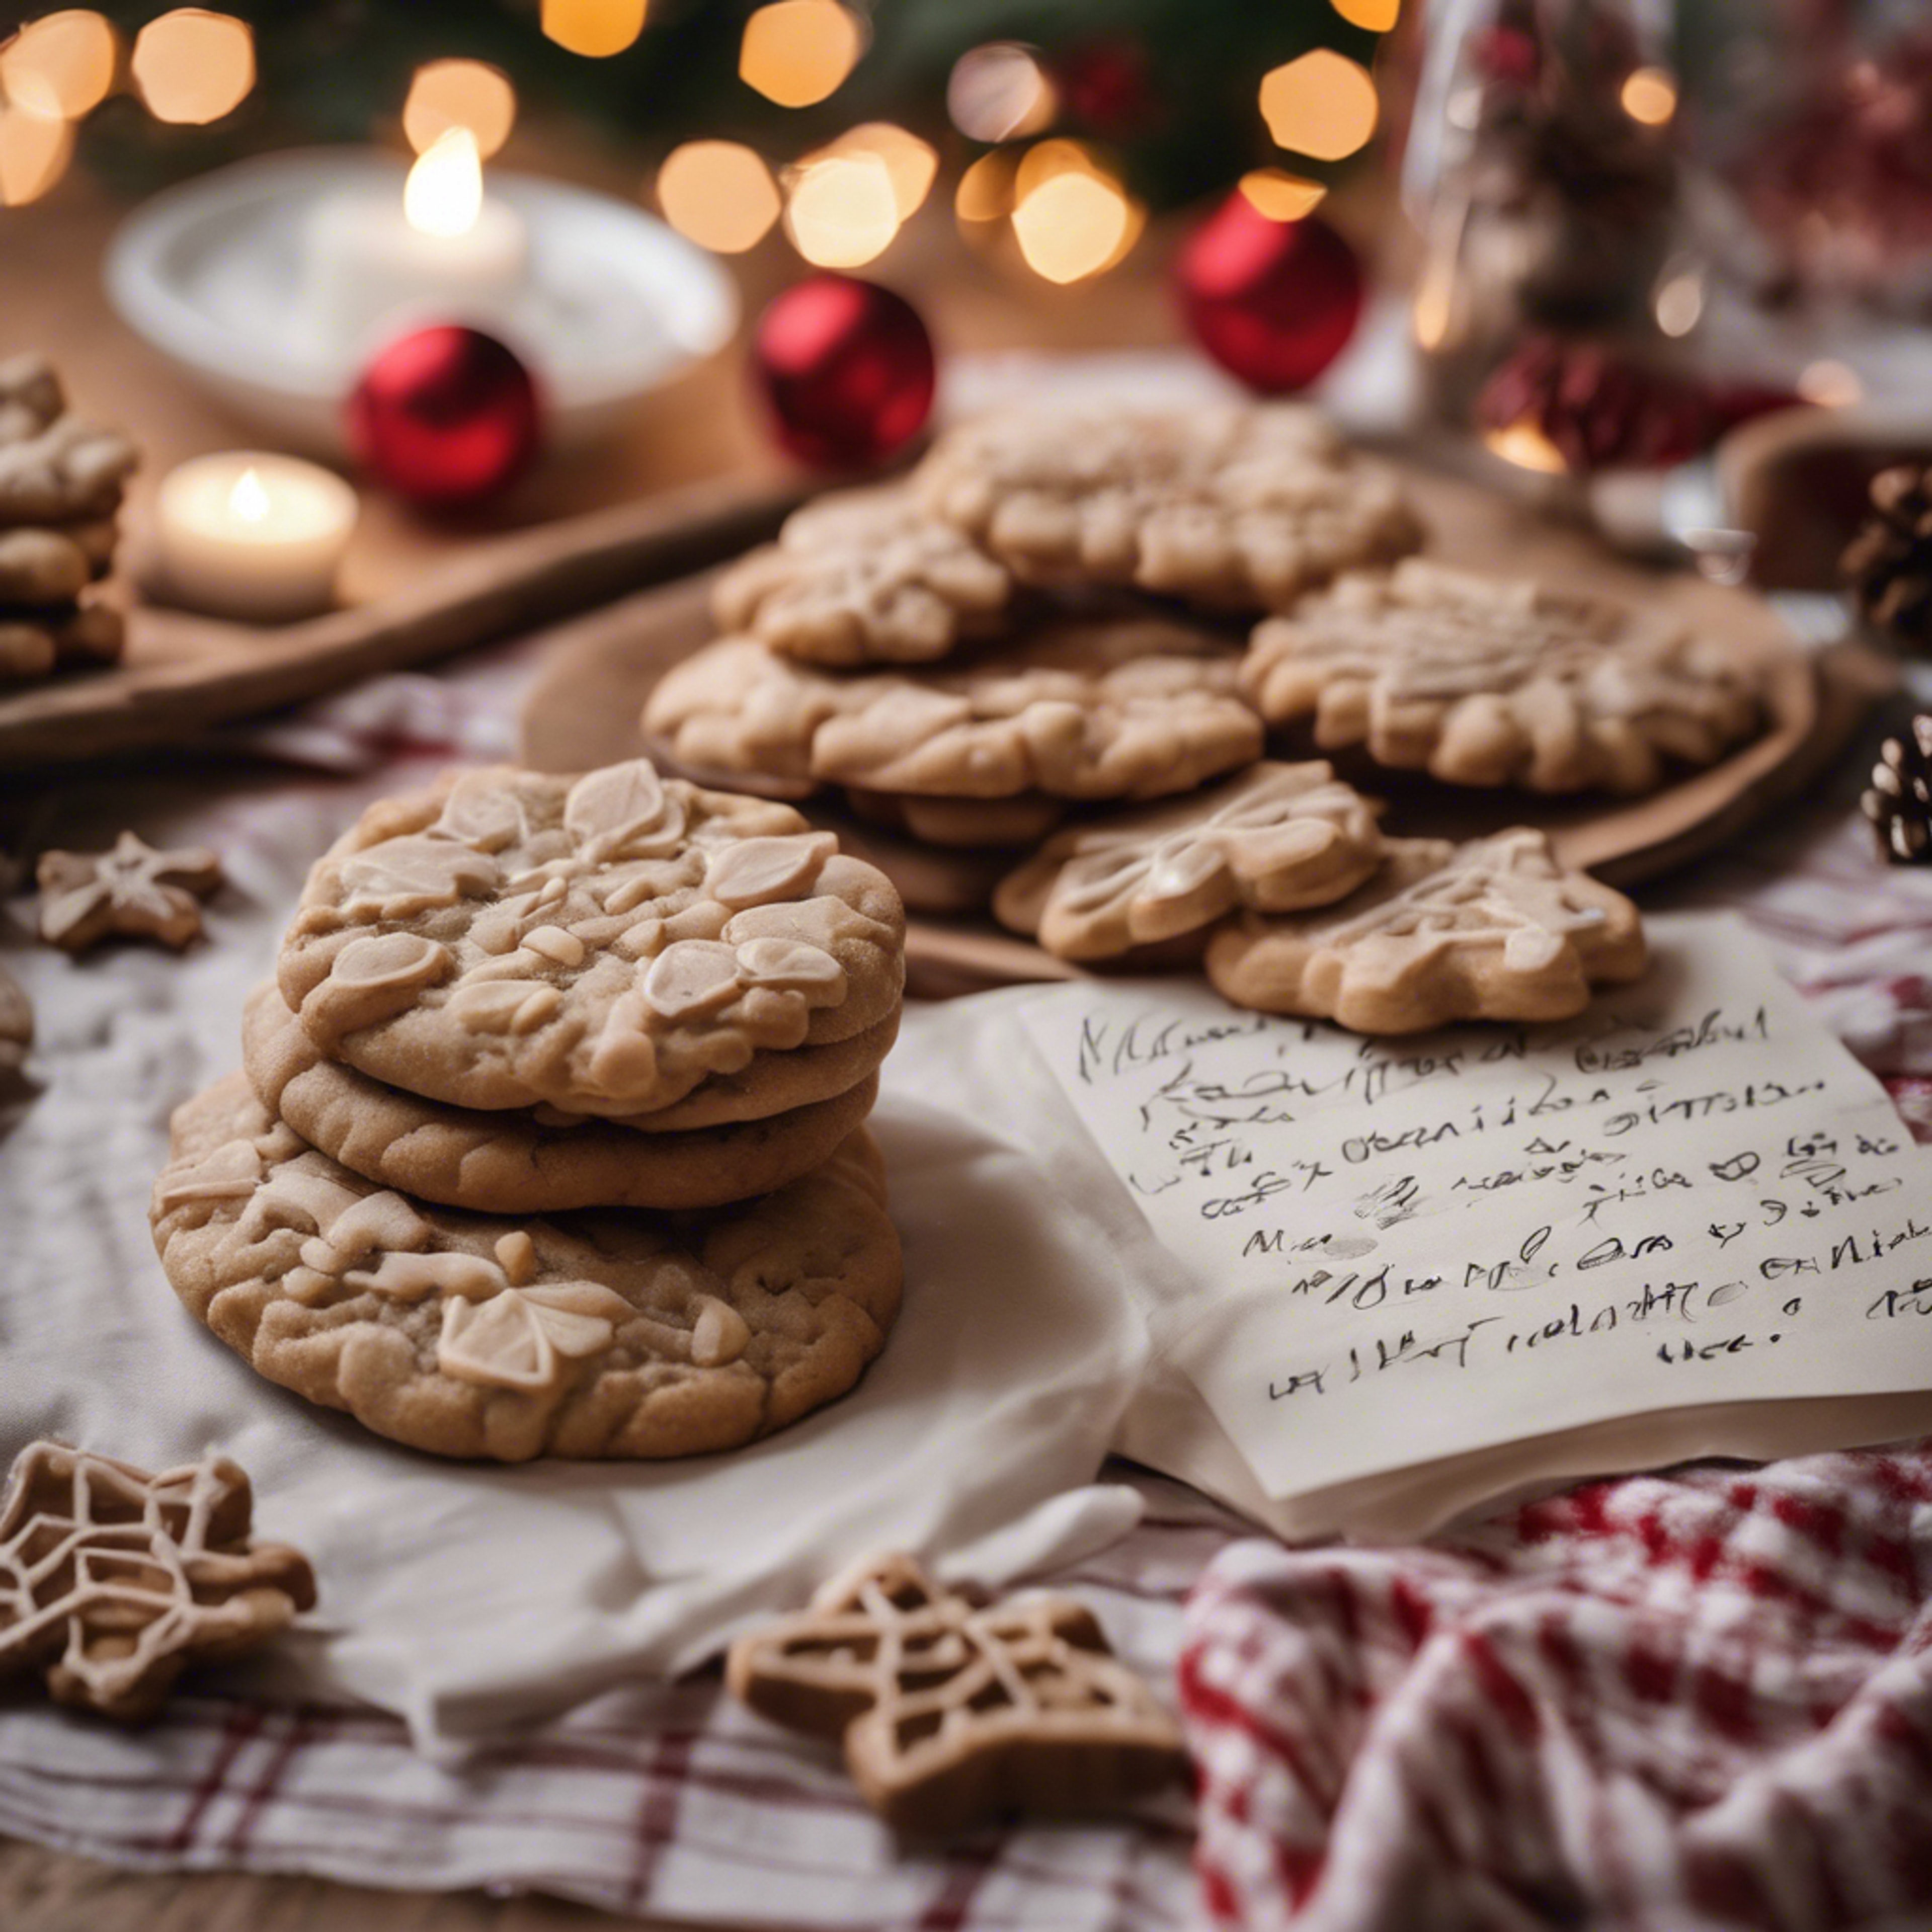 A spread of cozy, homemade Christmas cookies on a festive tablecloth, a glass of milk, and a note to Santa. วอลล์เปเปอร์[2a748ec29b0a47b6b2f7]